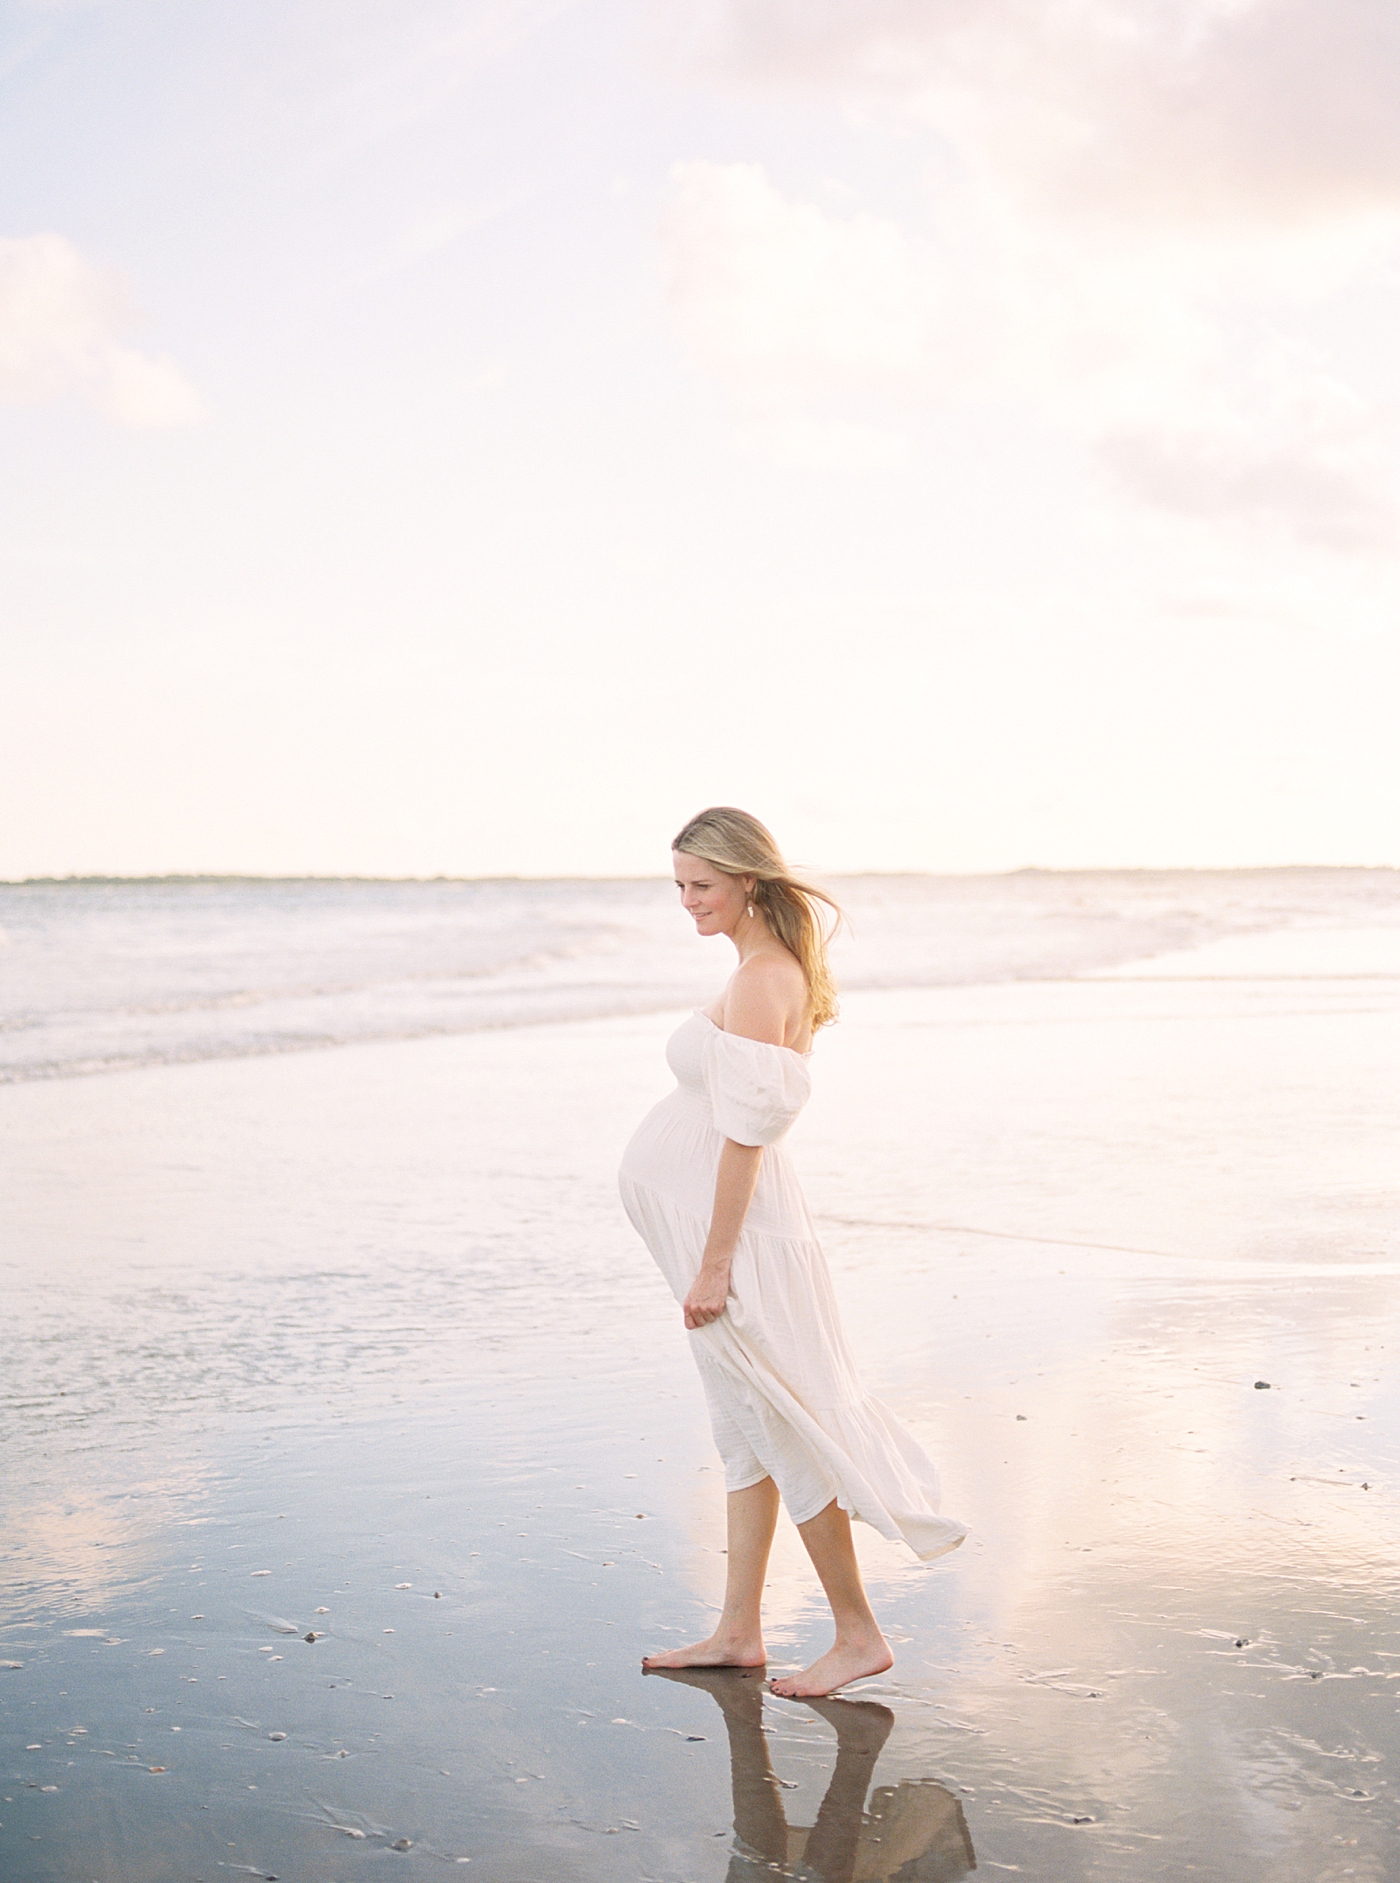 Mom to be in long white dress walking to the ocean | Image by Caitlyn Motycka